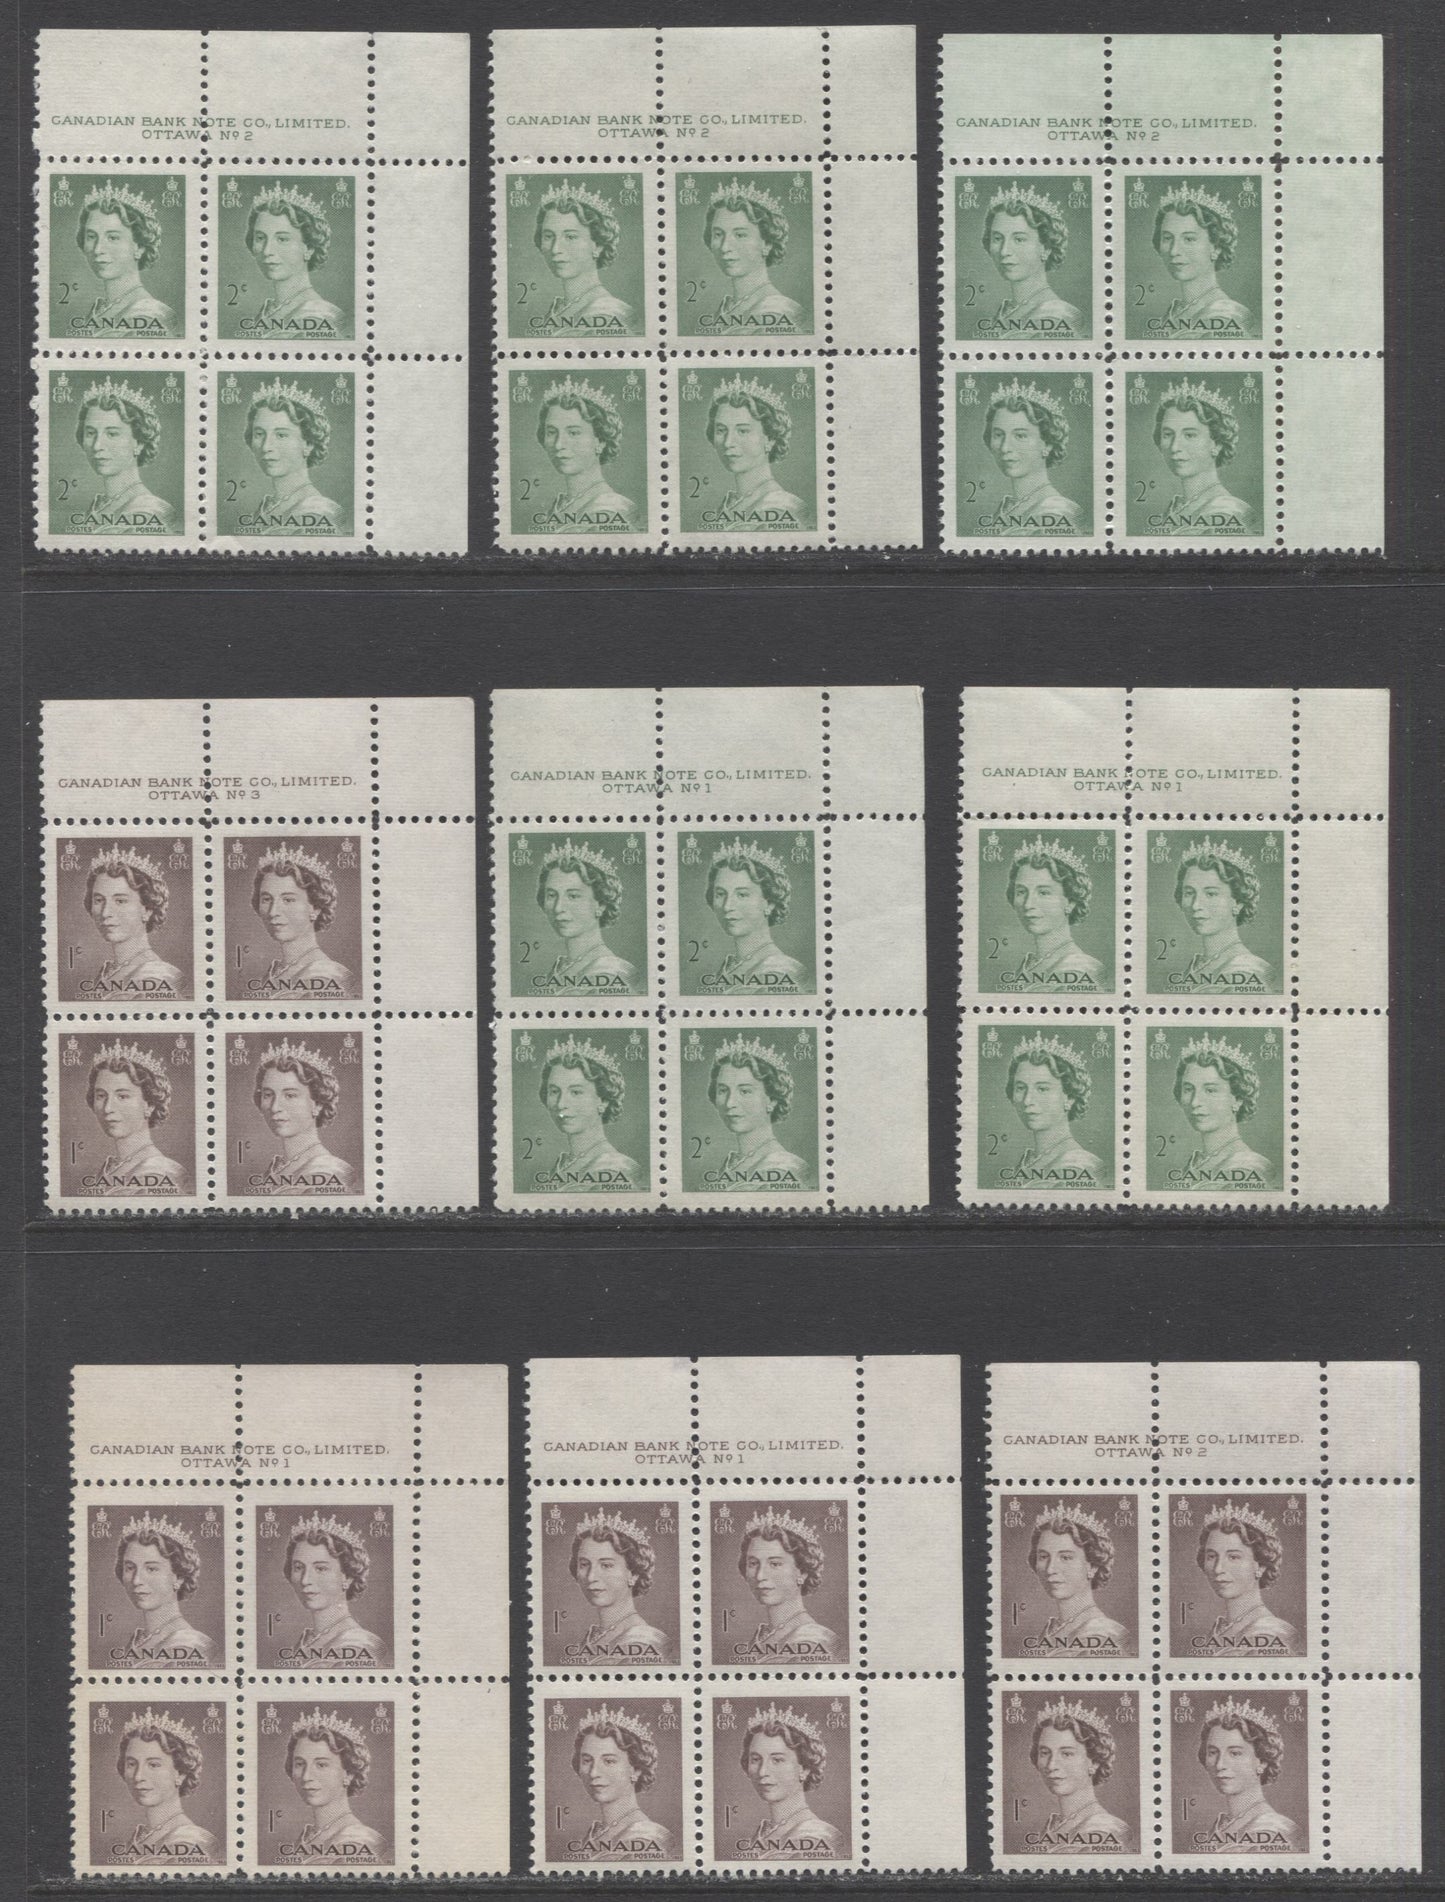 Lot 28 Canada #325-326 1c-2c Violet Brown-Green Queen Elizabeth II, 1953 Karsh Issue, 15 VFNH UR Plates 1-6 Blocks Of 4 On Horizontal Wove Papers With Additional Shades